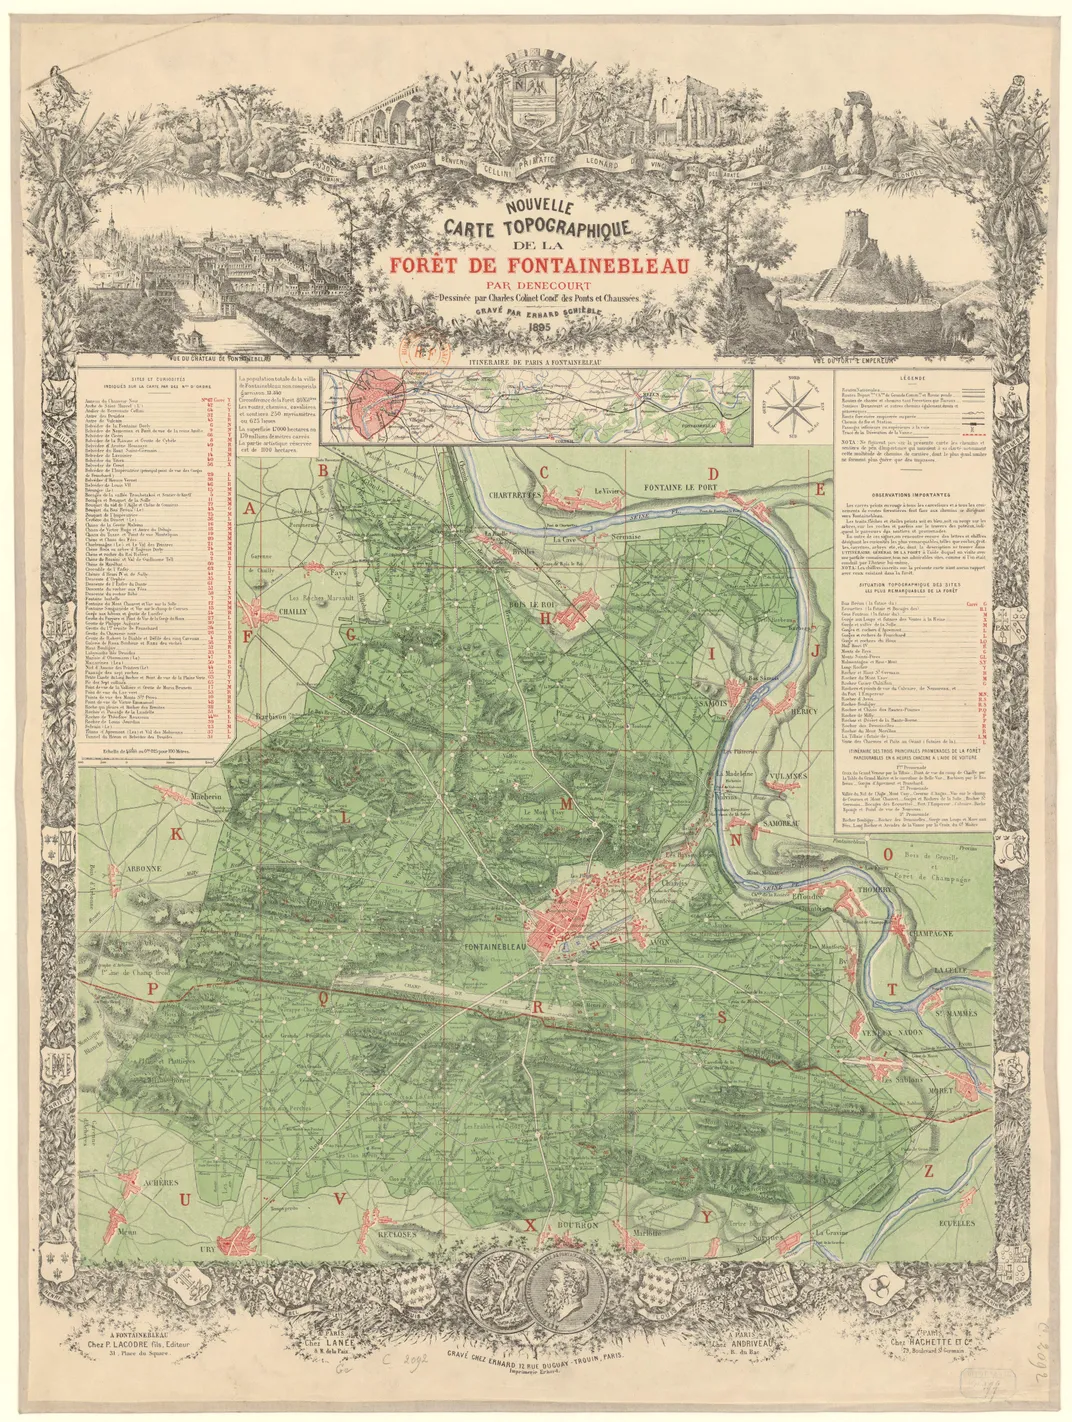 1895 map by Charles Colinet